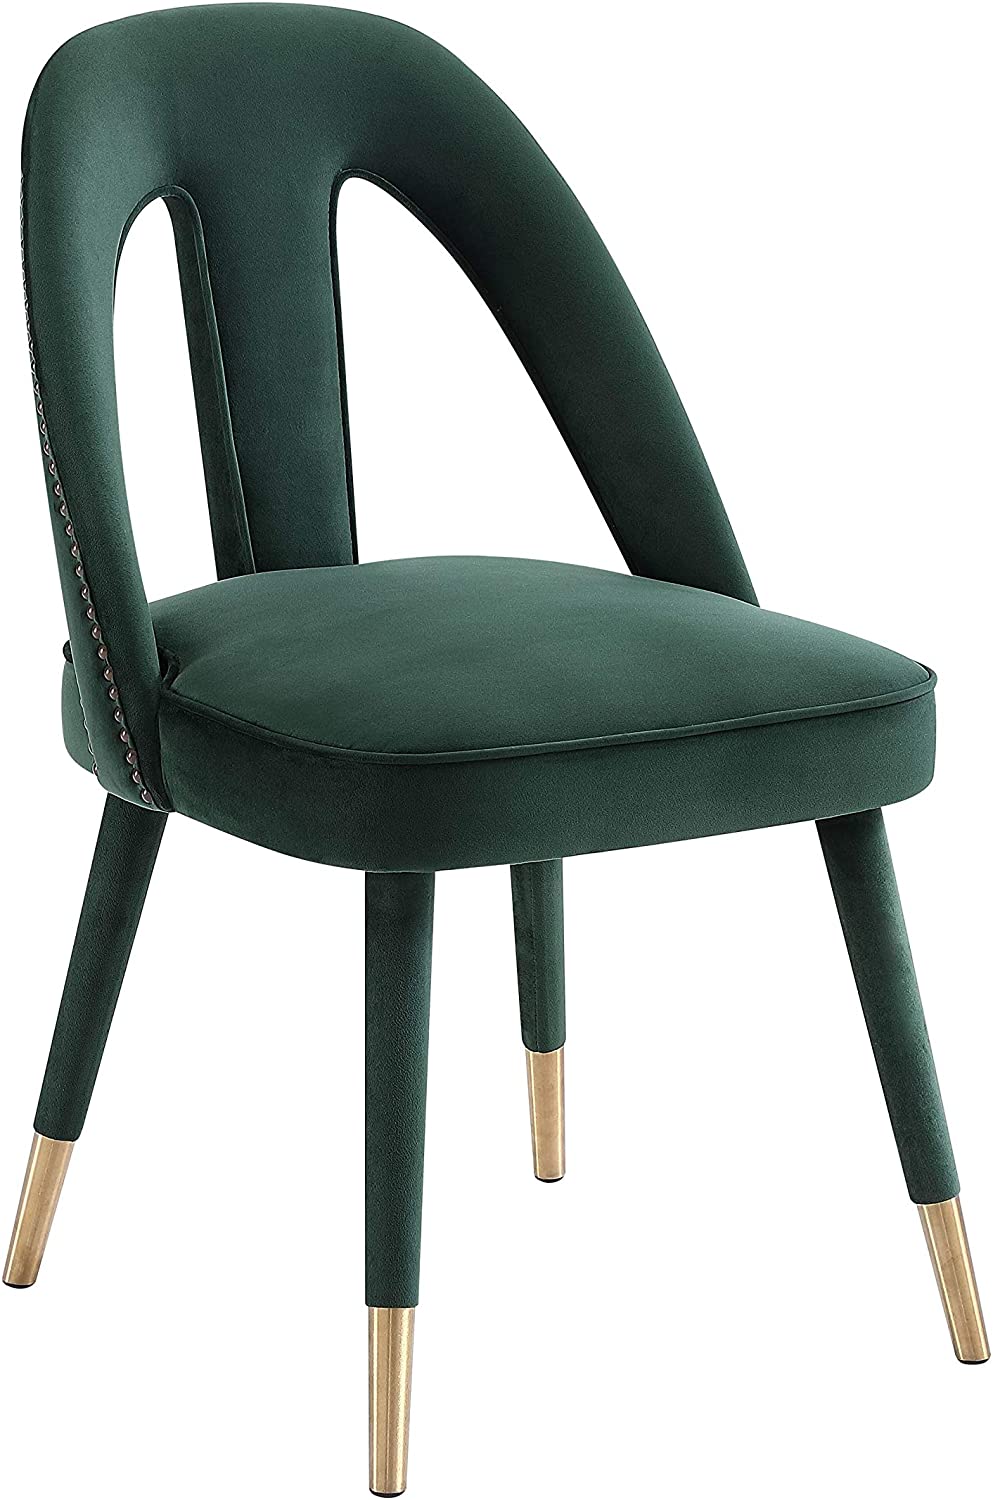 B082N4DJVK TOV Furniture Petra Contemporary Velvet Upholstered Dining Room Chair with Nailhead Trim Accents, 20.5", Forest Green